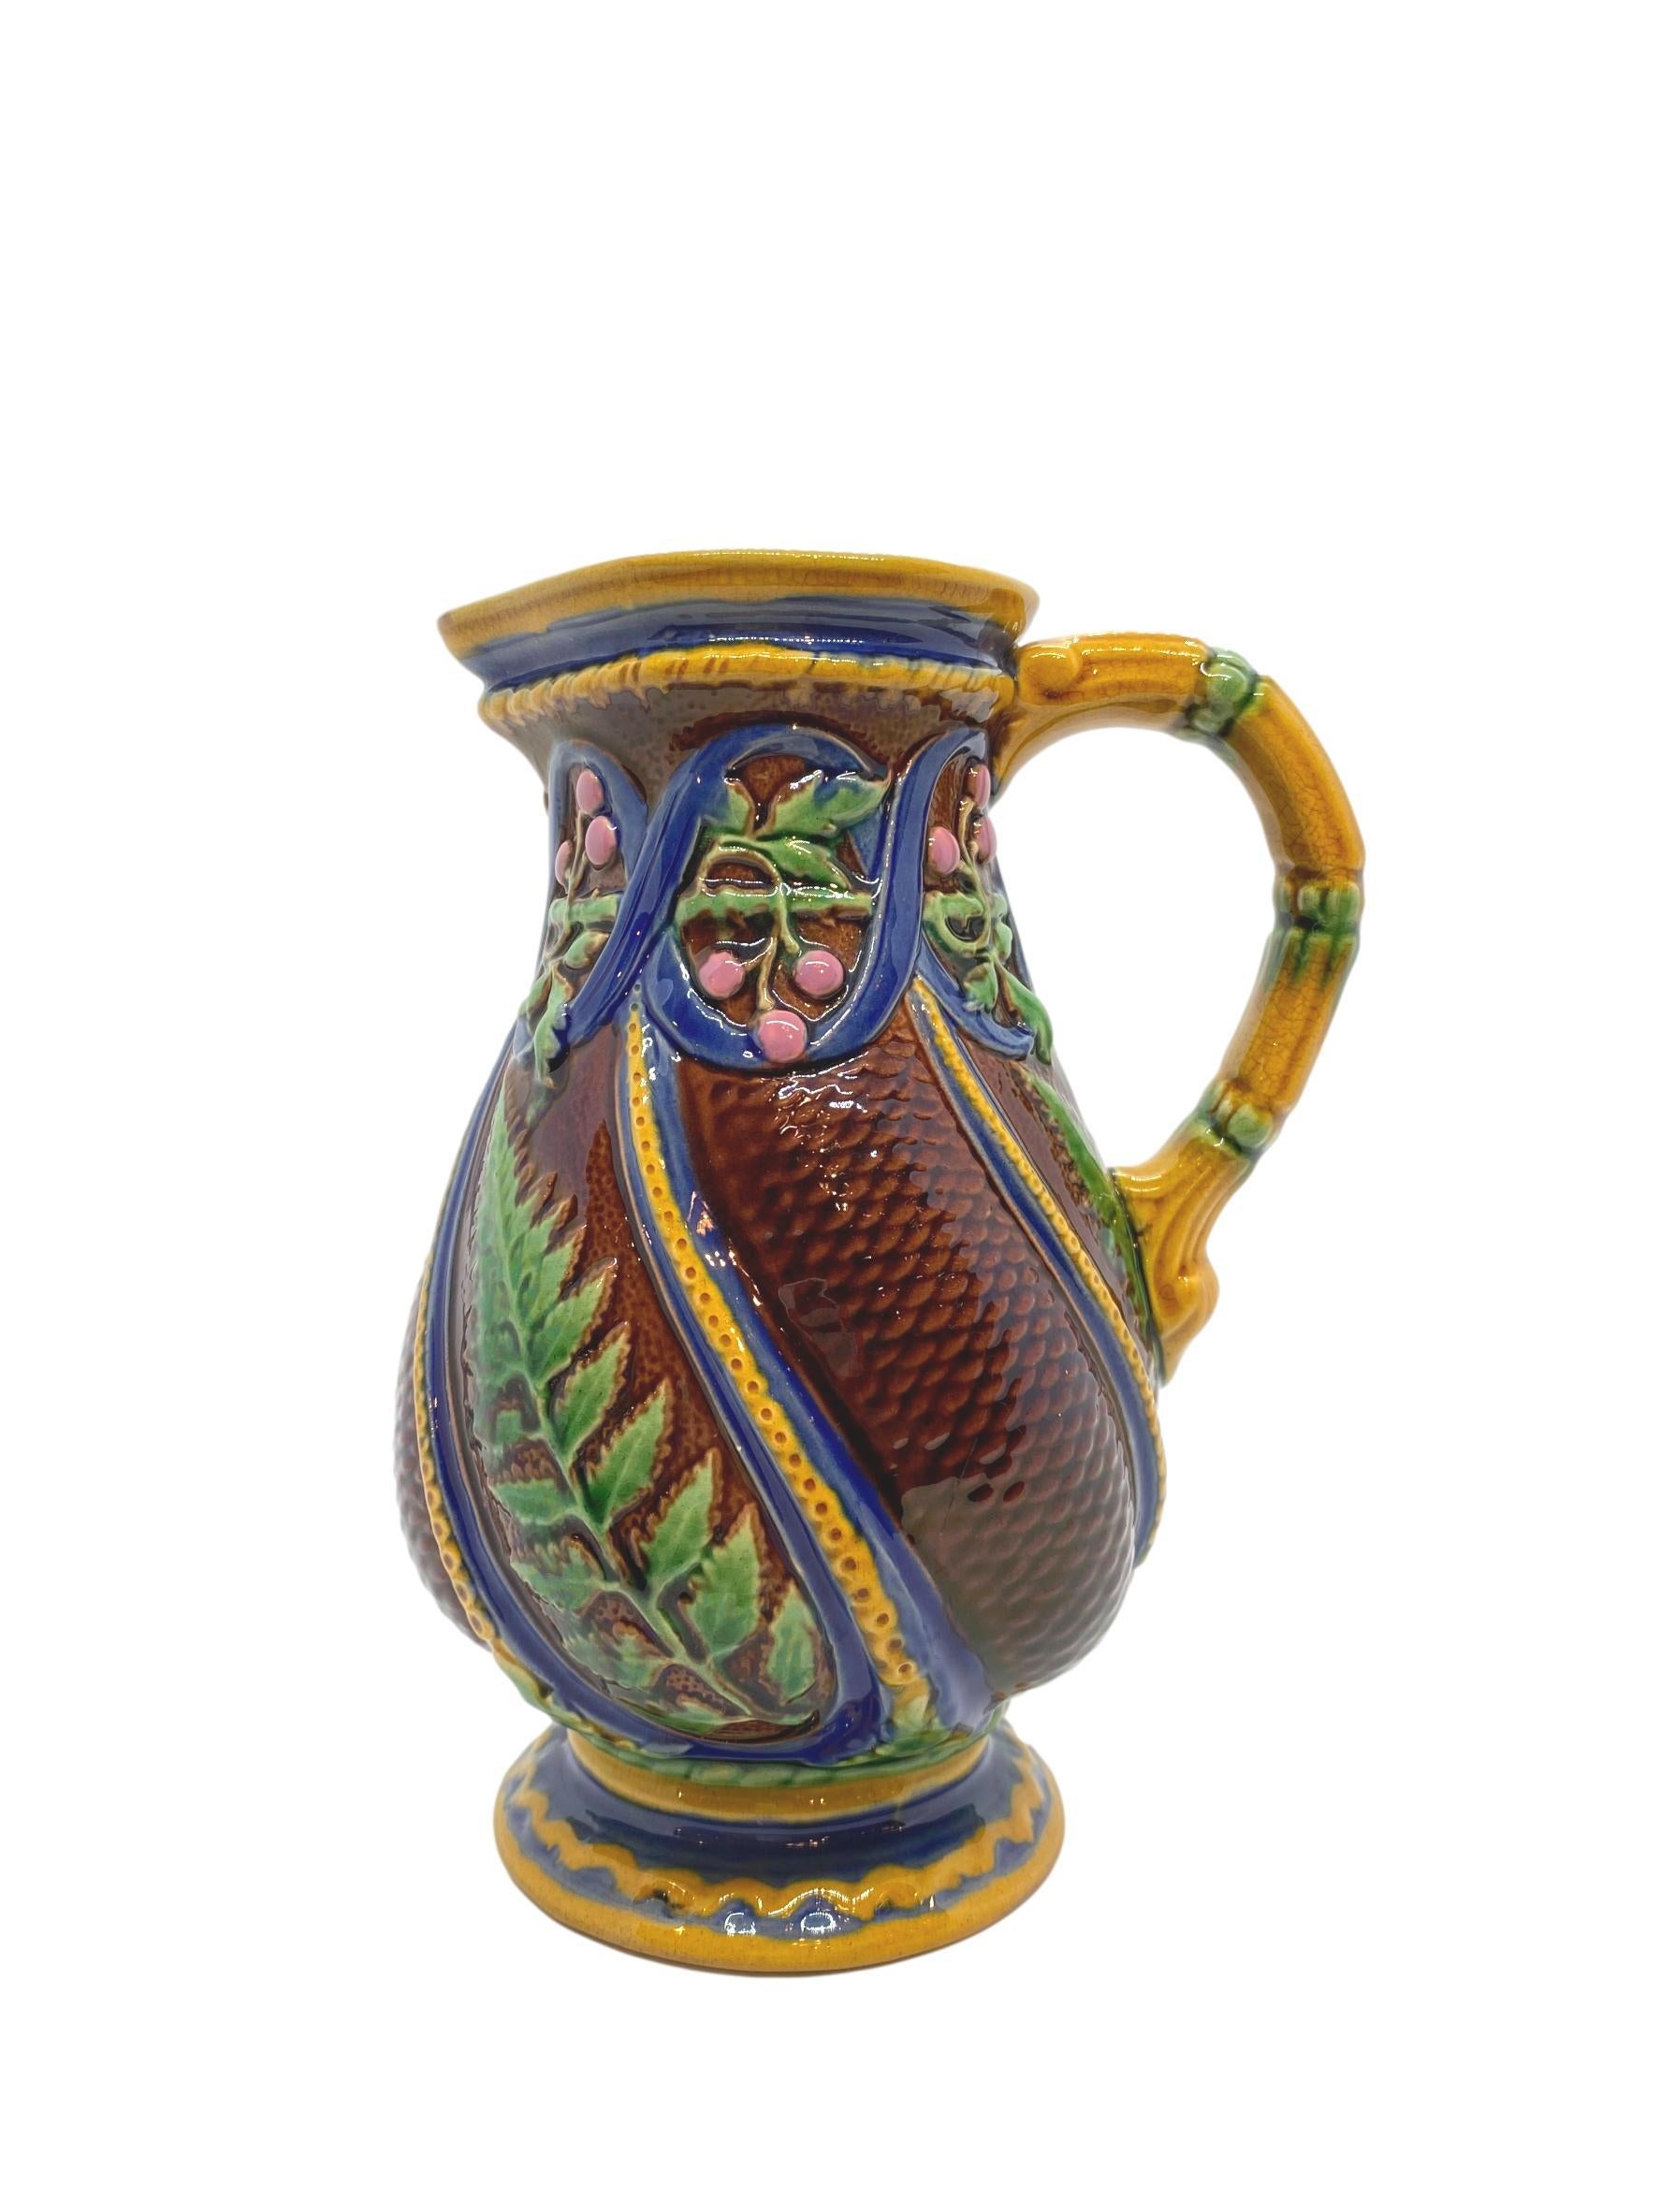 Victorian Minton Majolica Pitcher with Ferns and Pink Berries, English, Dated 1860